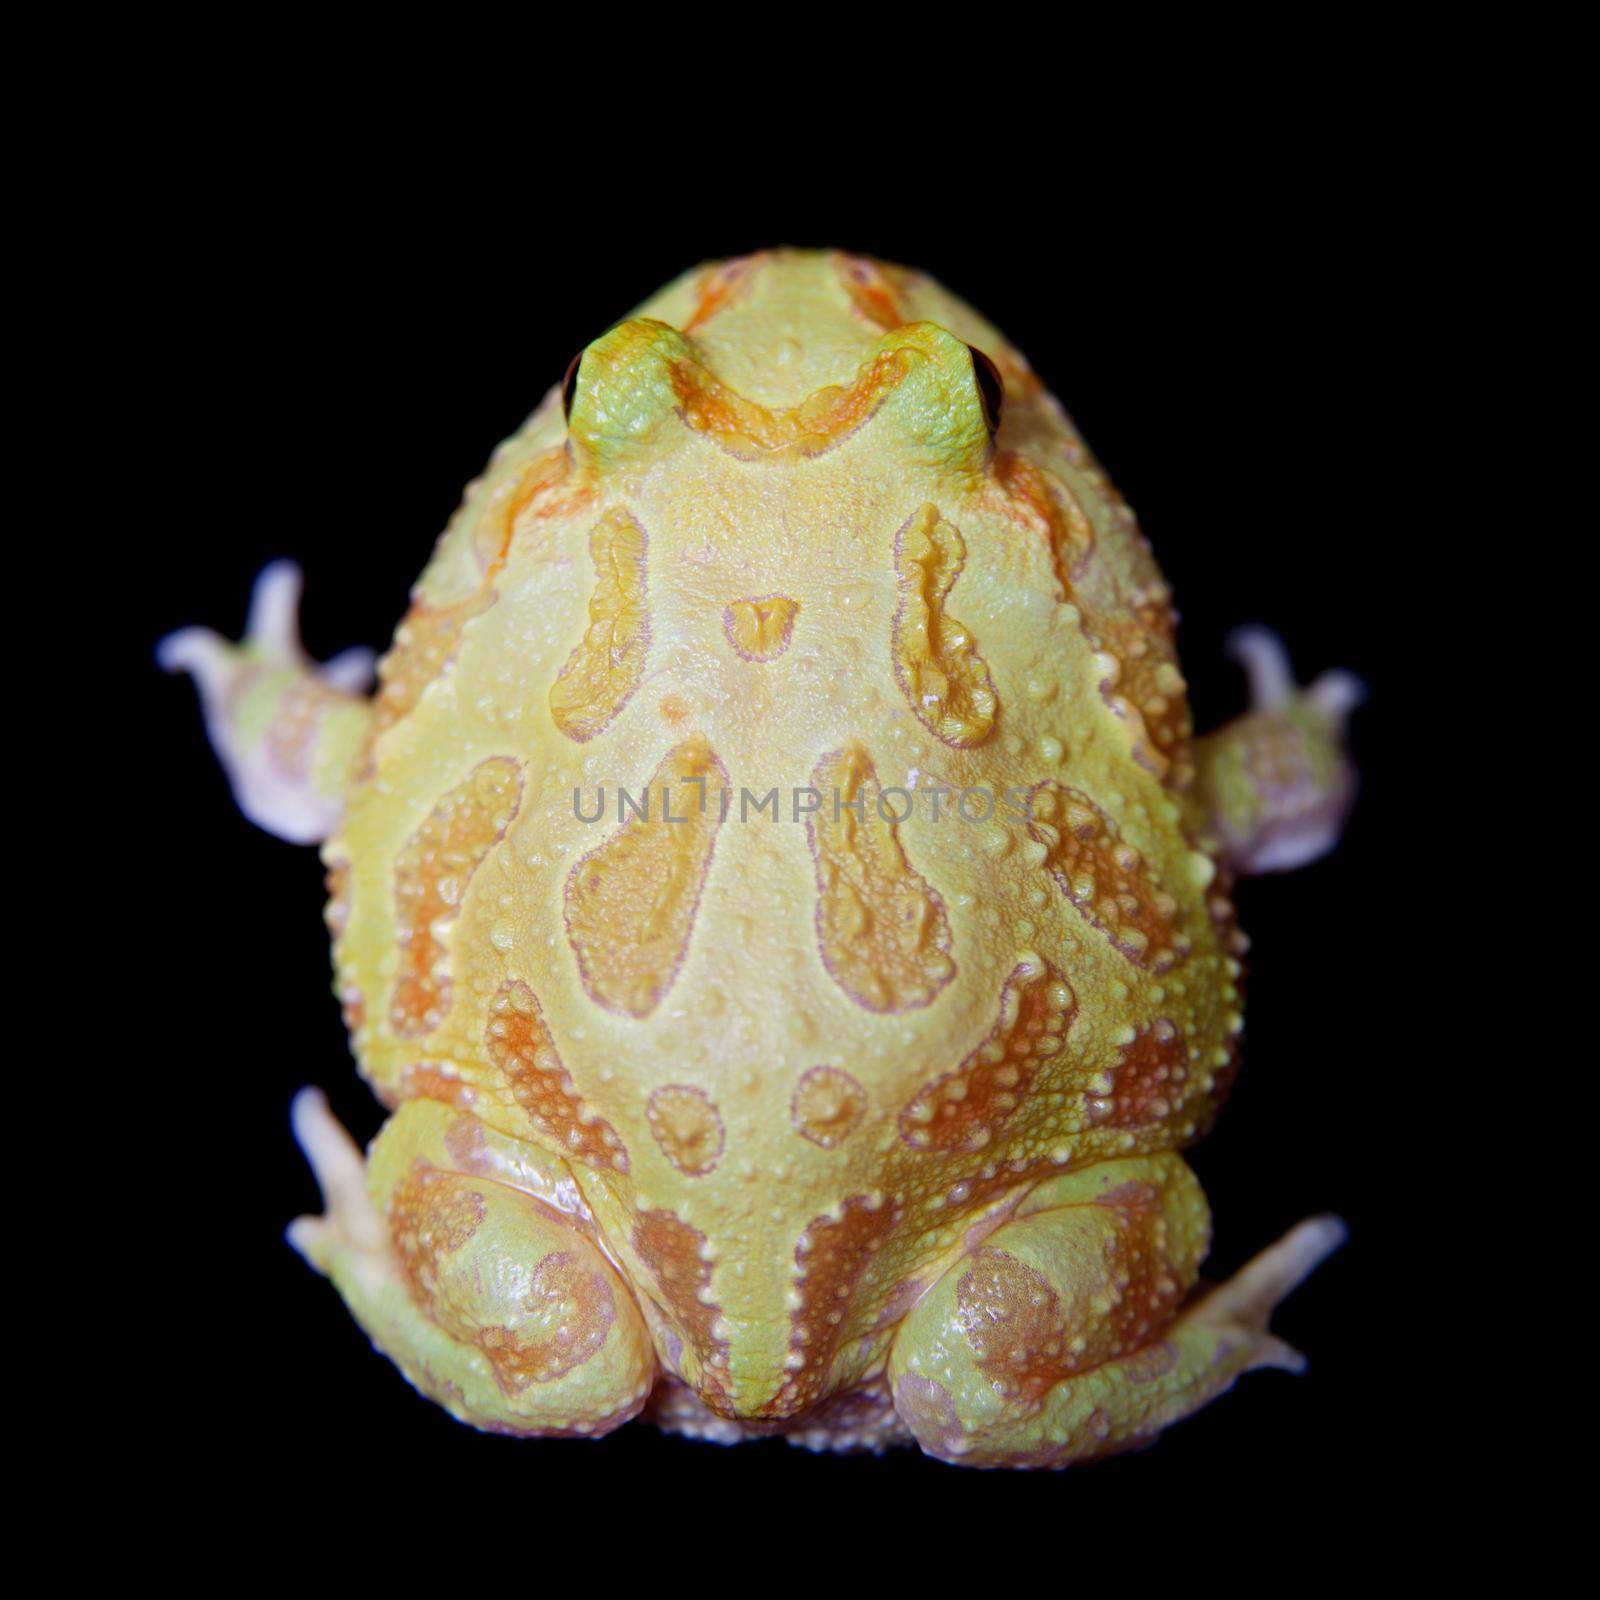 The chachoan horned frog, Ceratophrys cranwelli, isolated on black background